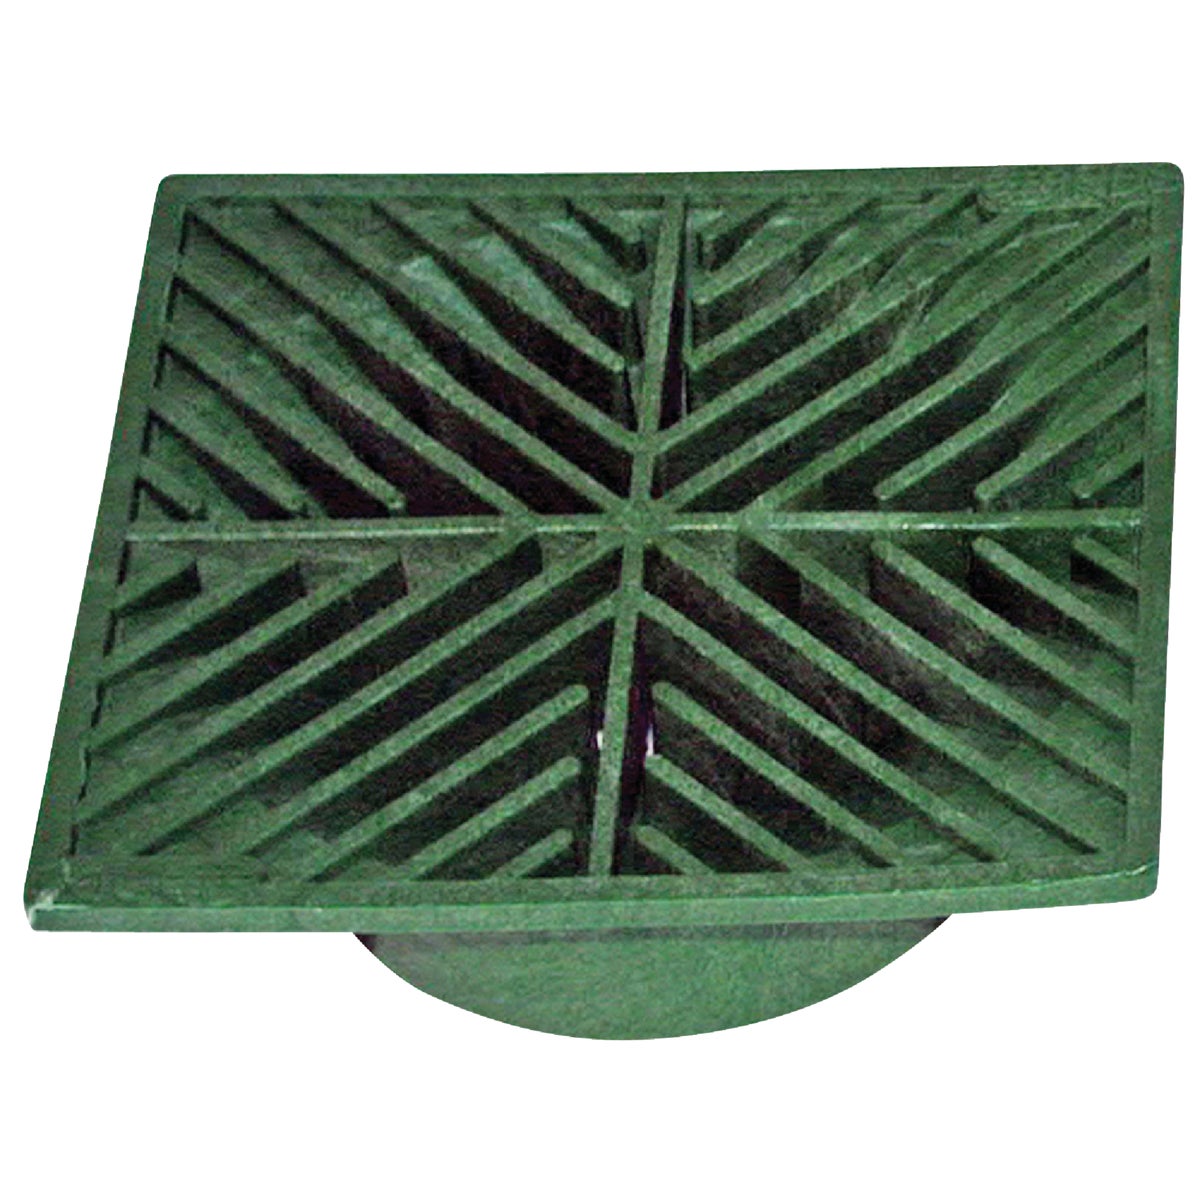 NDS 6 In. x 6 In. Green Polyolefin Square Grate